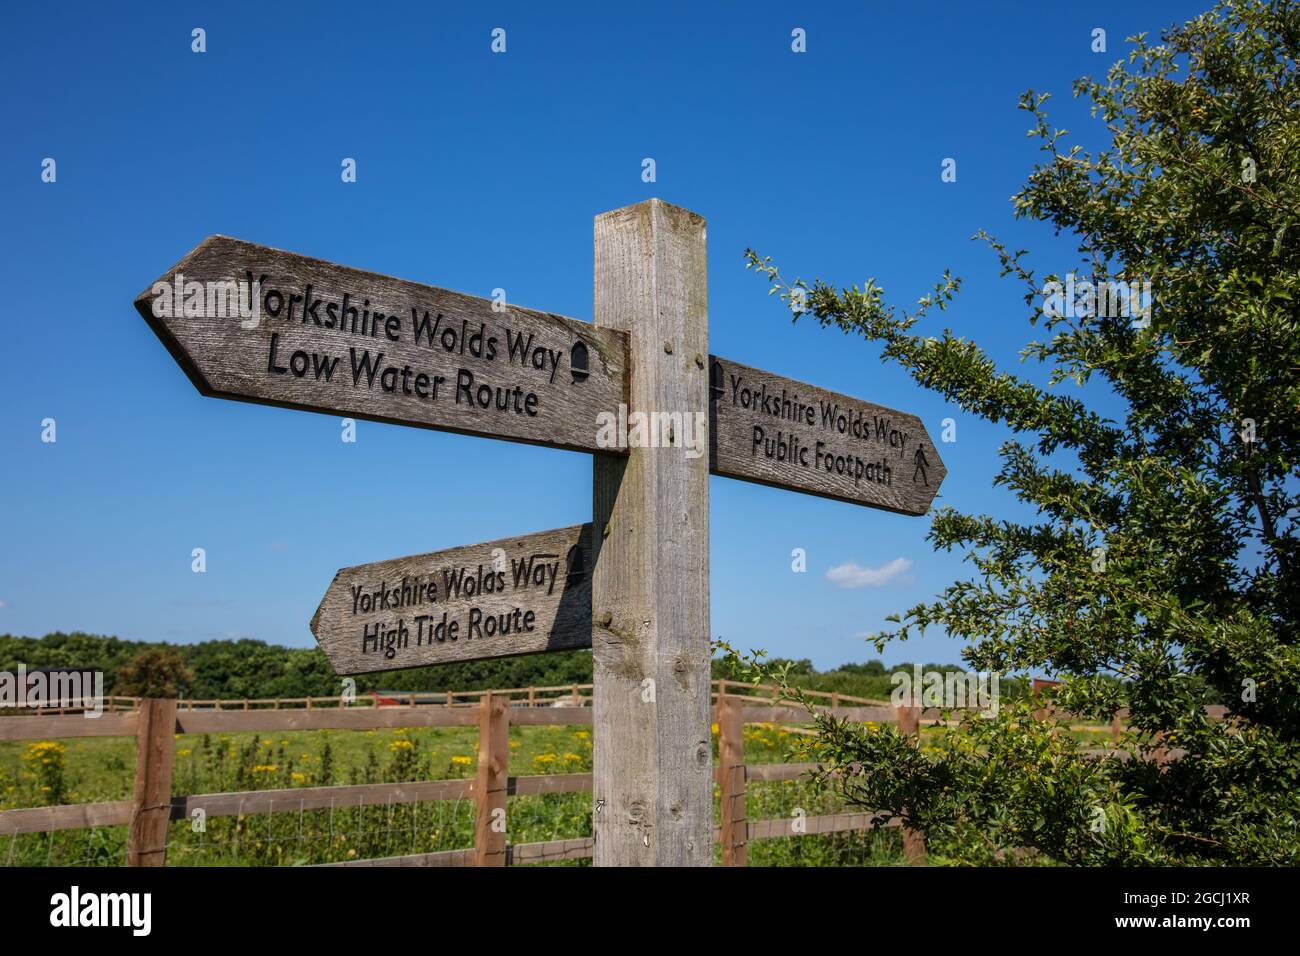 Signpost on The Yorkshire Wolds Way - a National Trail in the Yorkshire Wolds. England, United Kingdom Stock Photo